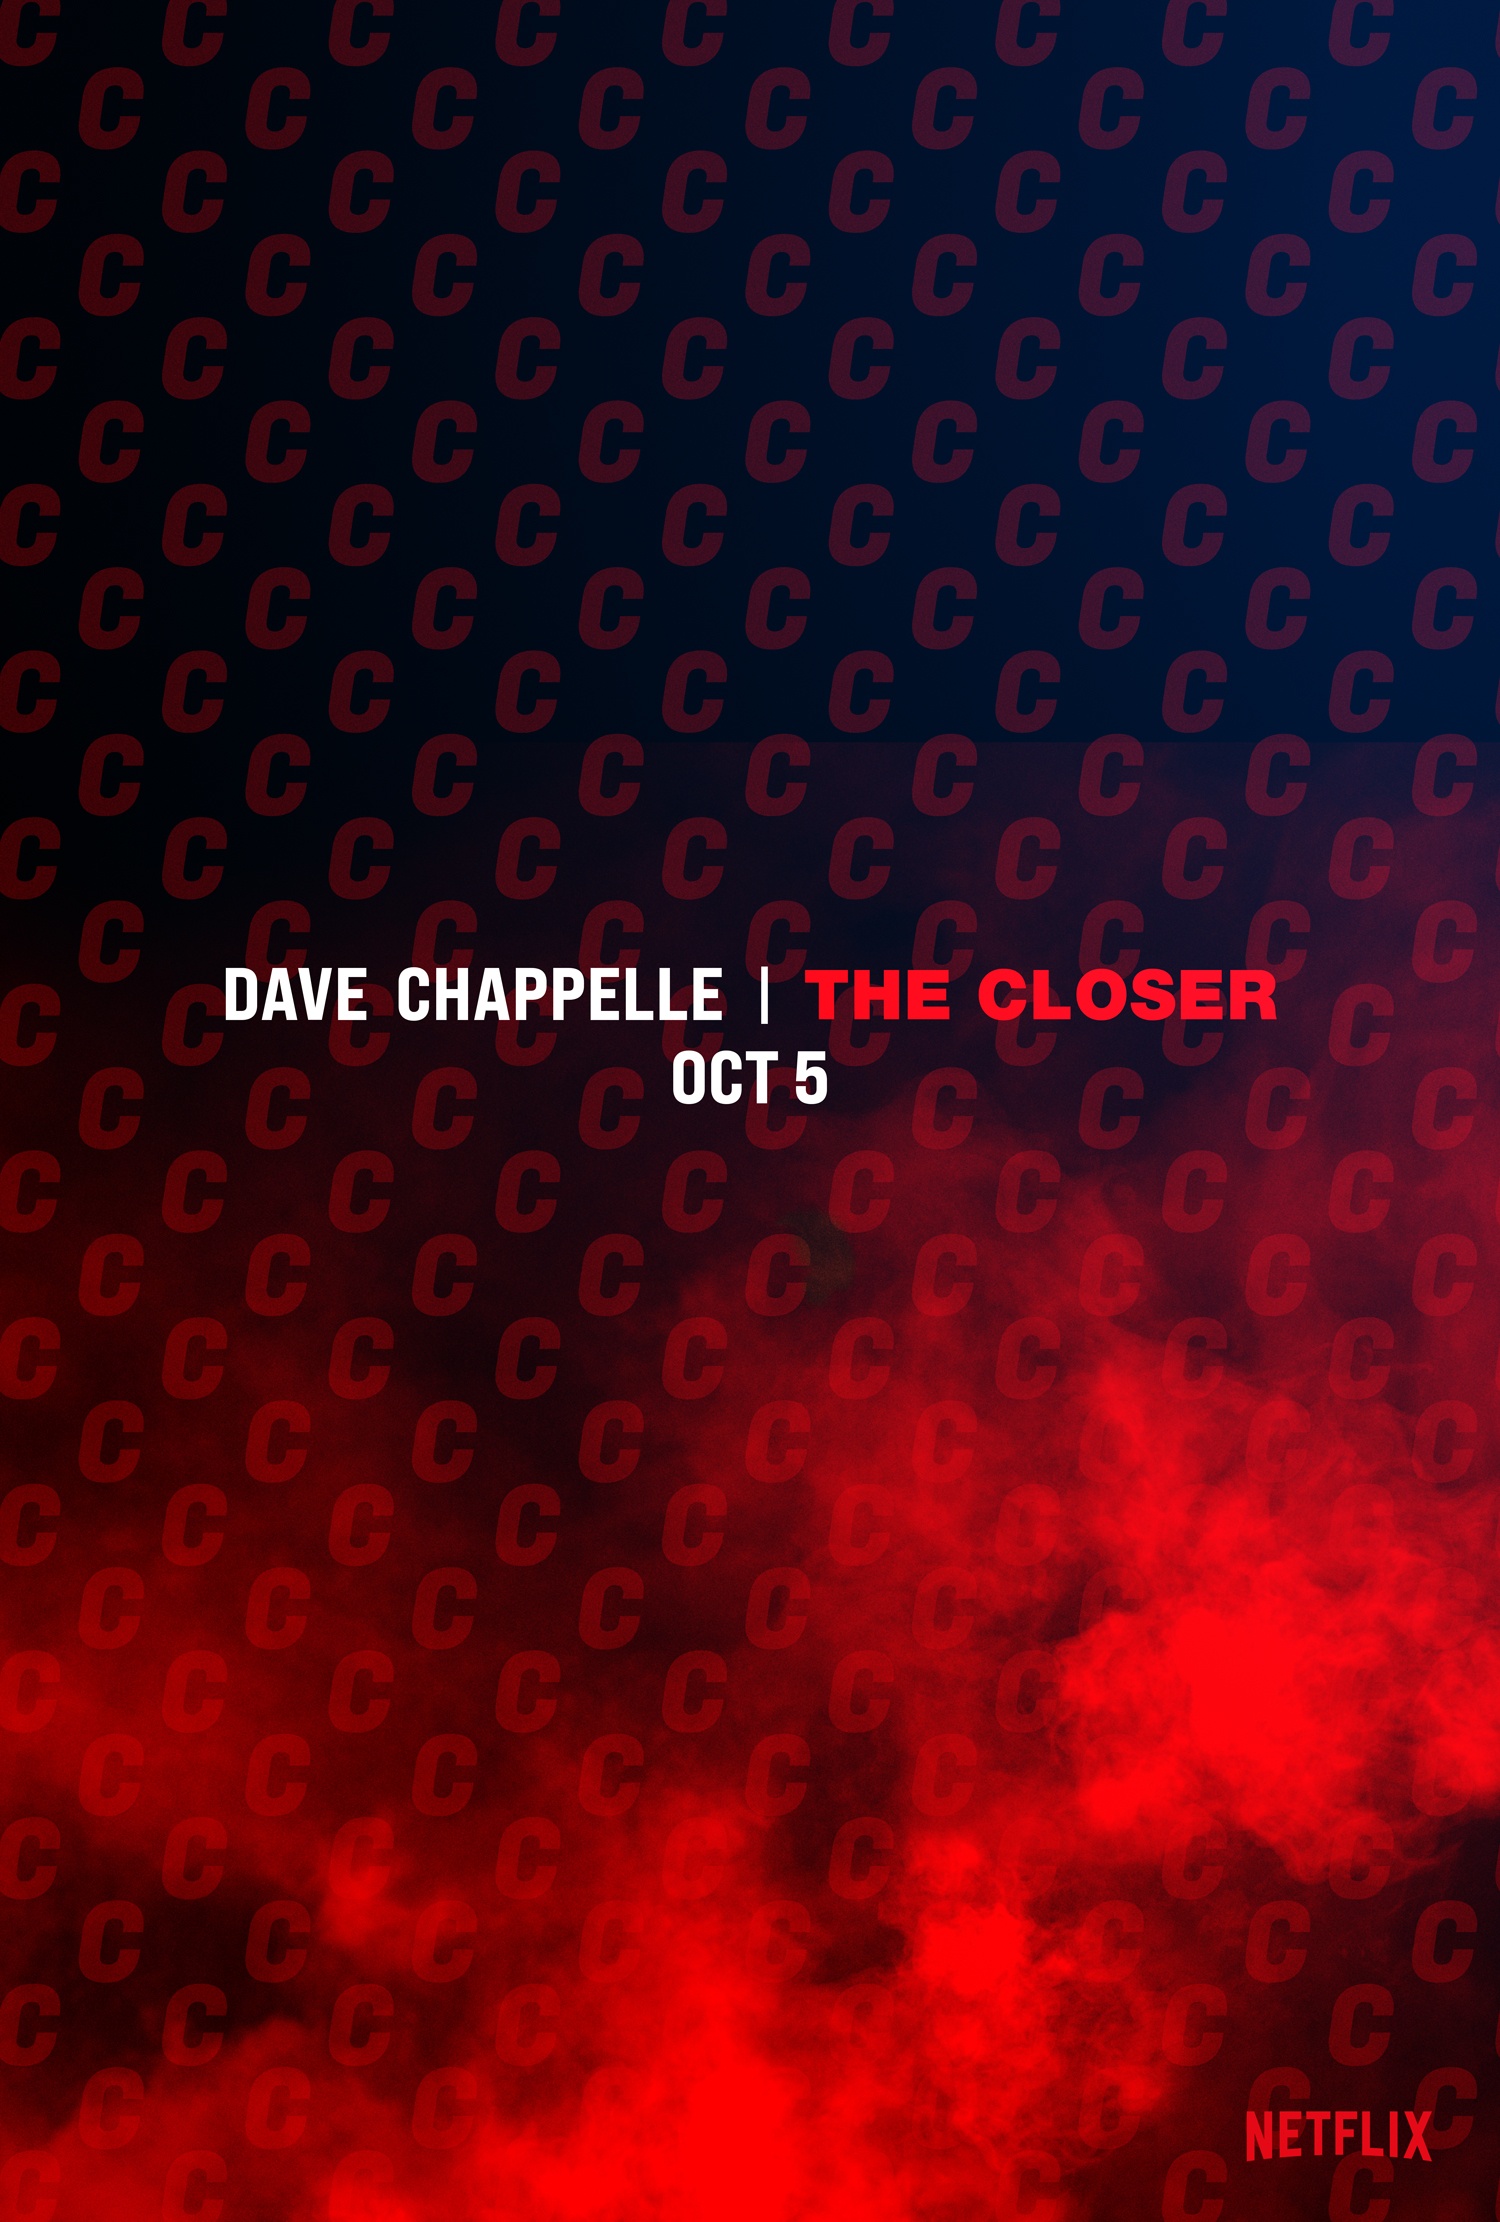 Netflix Announces Dave Chappelle’s  Newest Comedy Special, The Closer